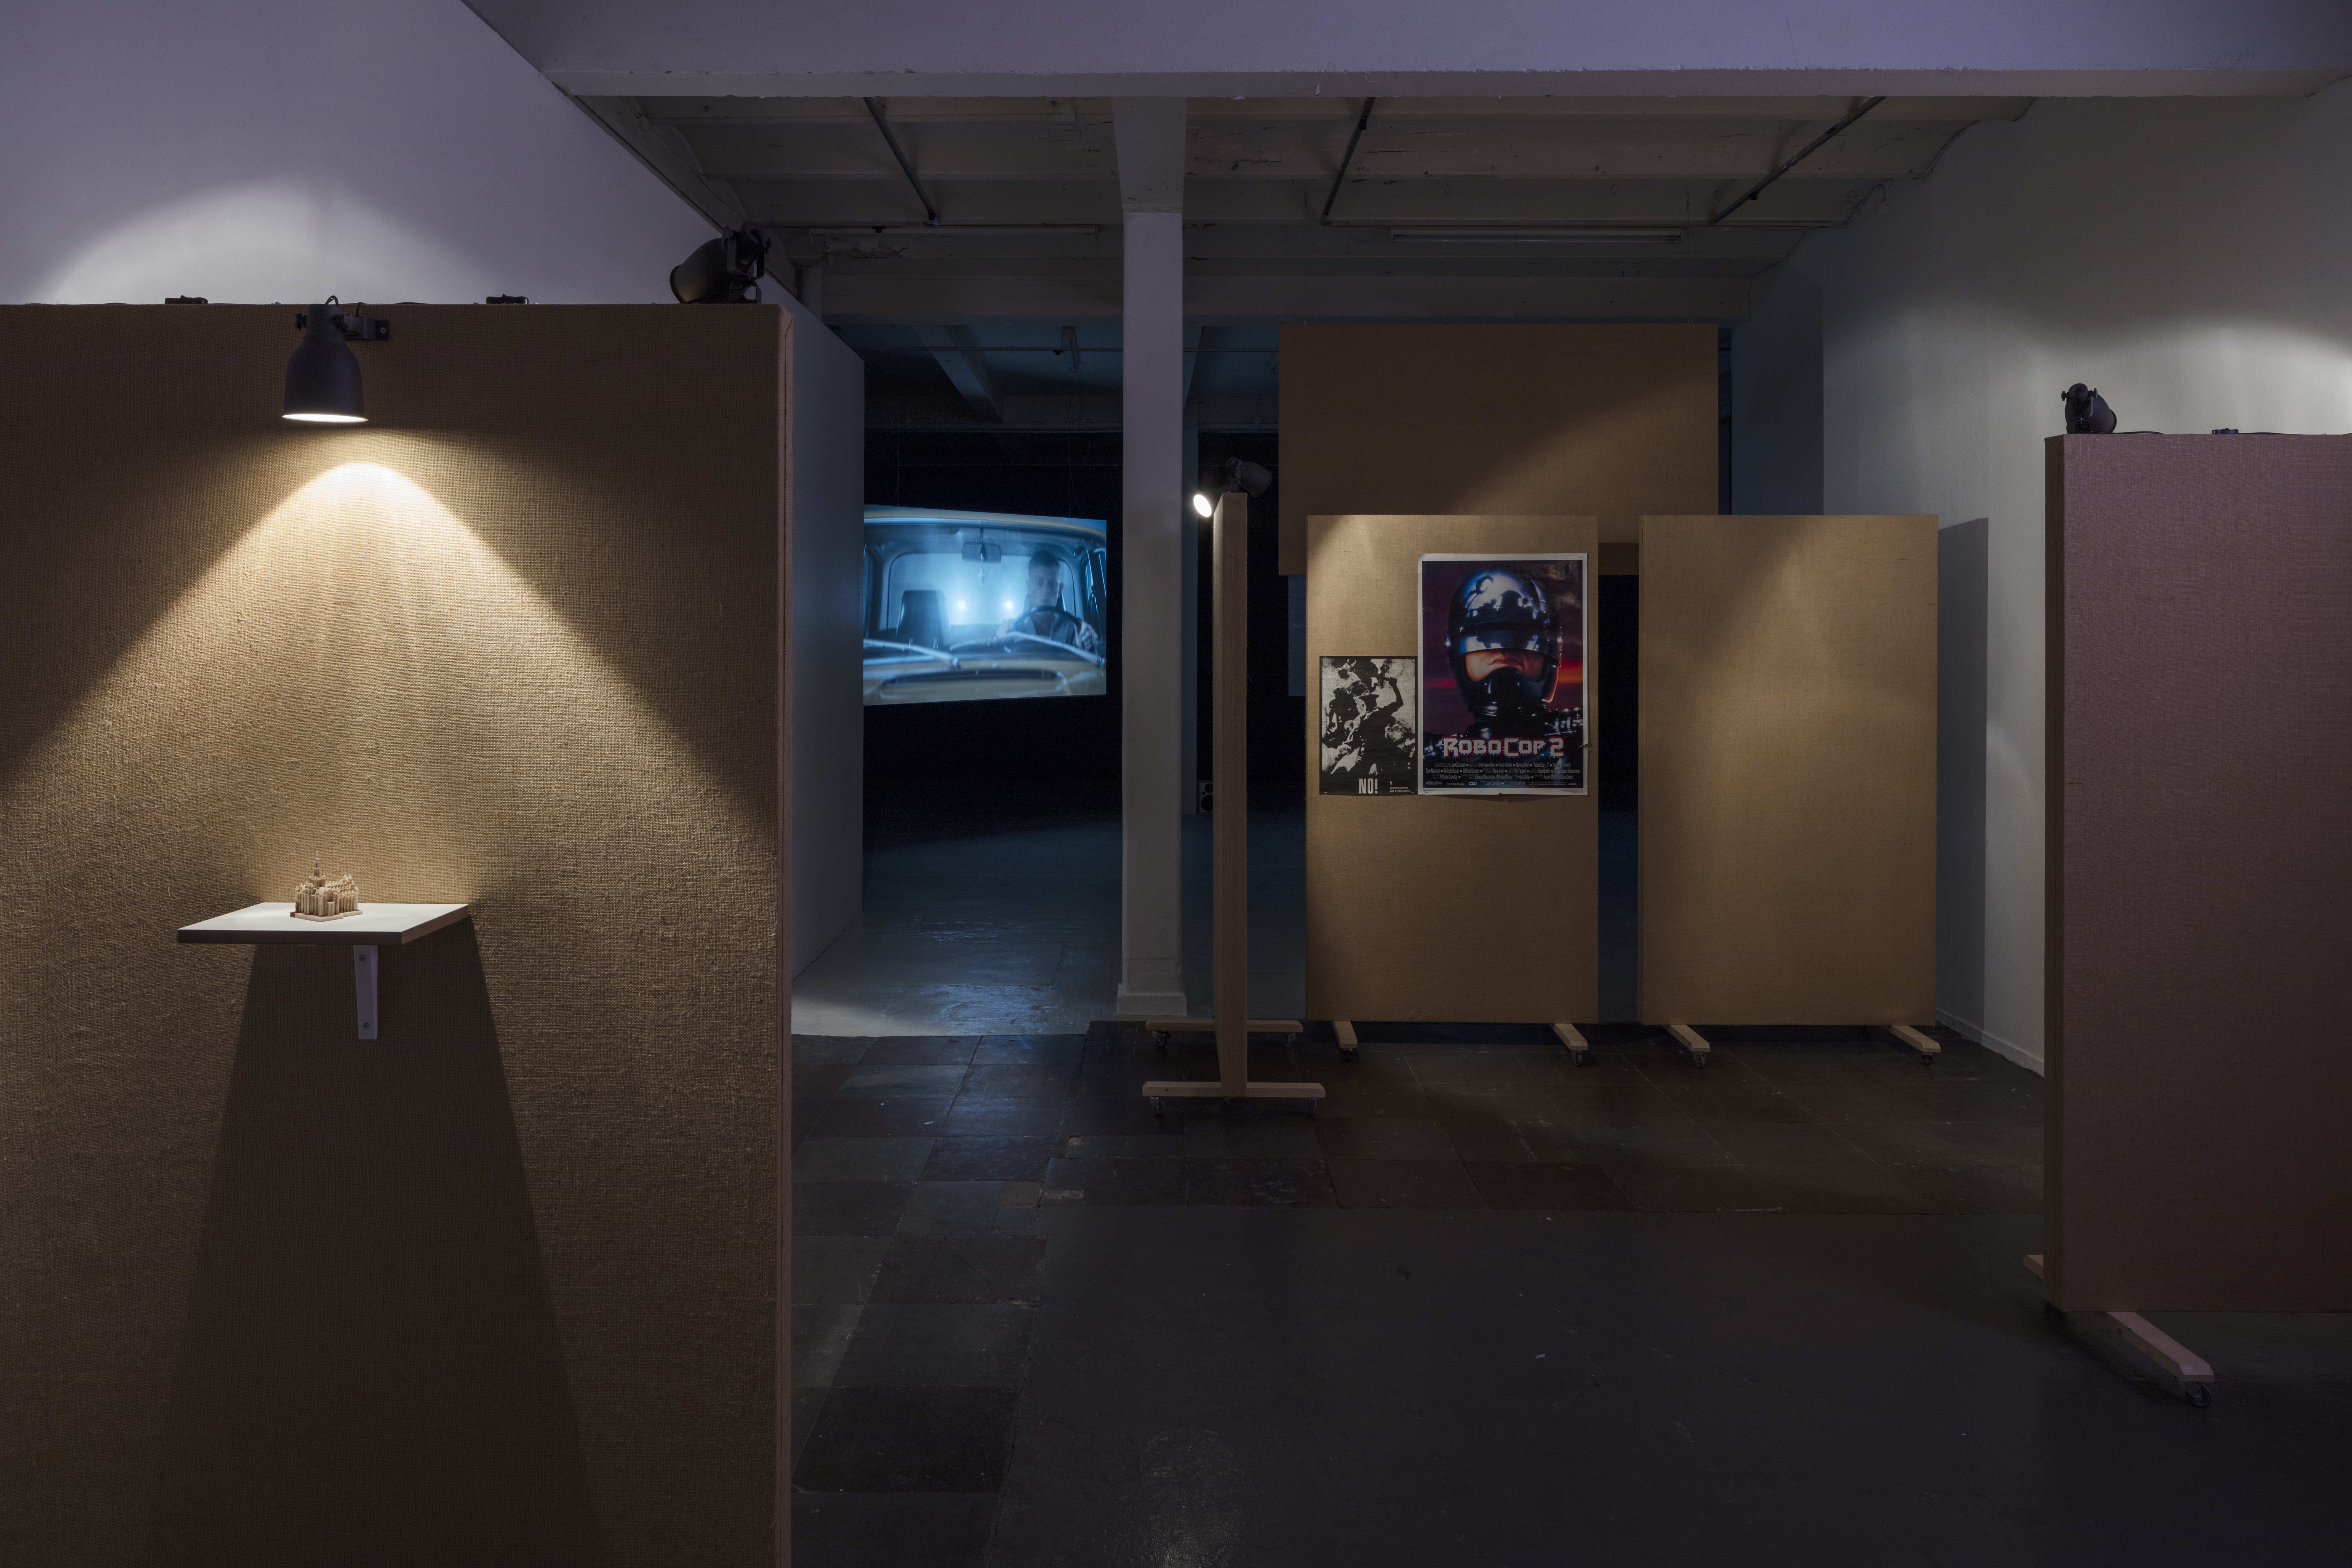 Installation View from "You’re Gonna Die Up There" – Overgaden